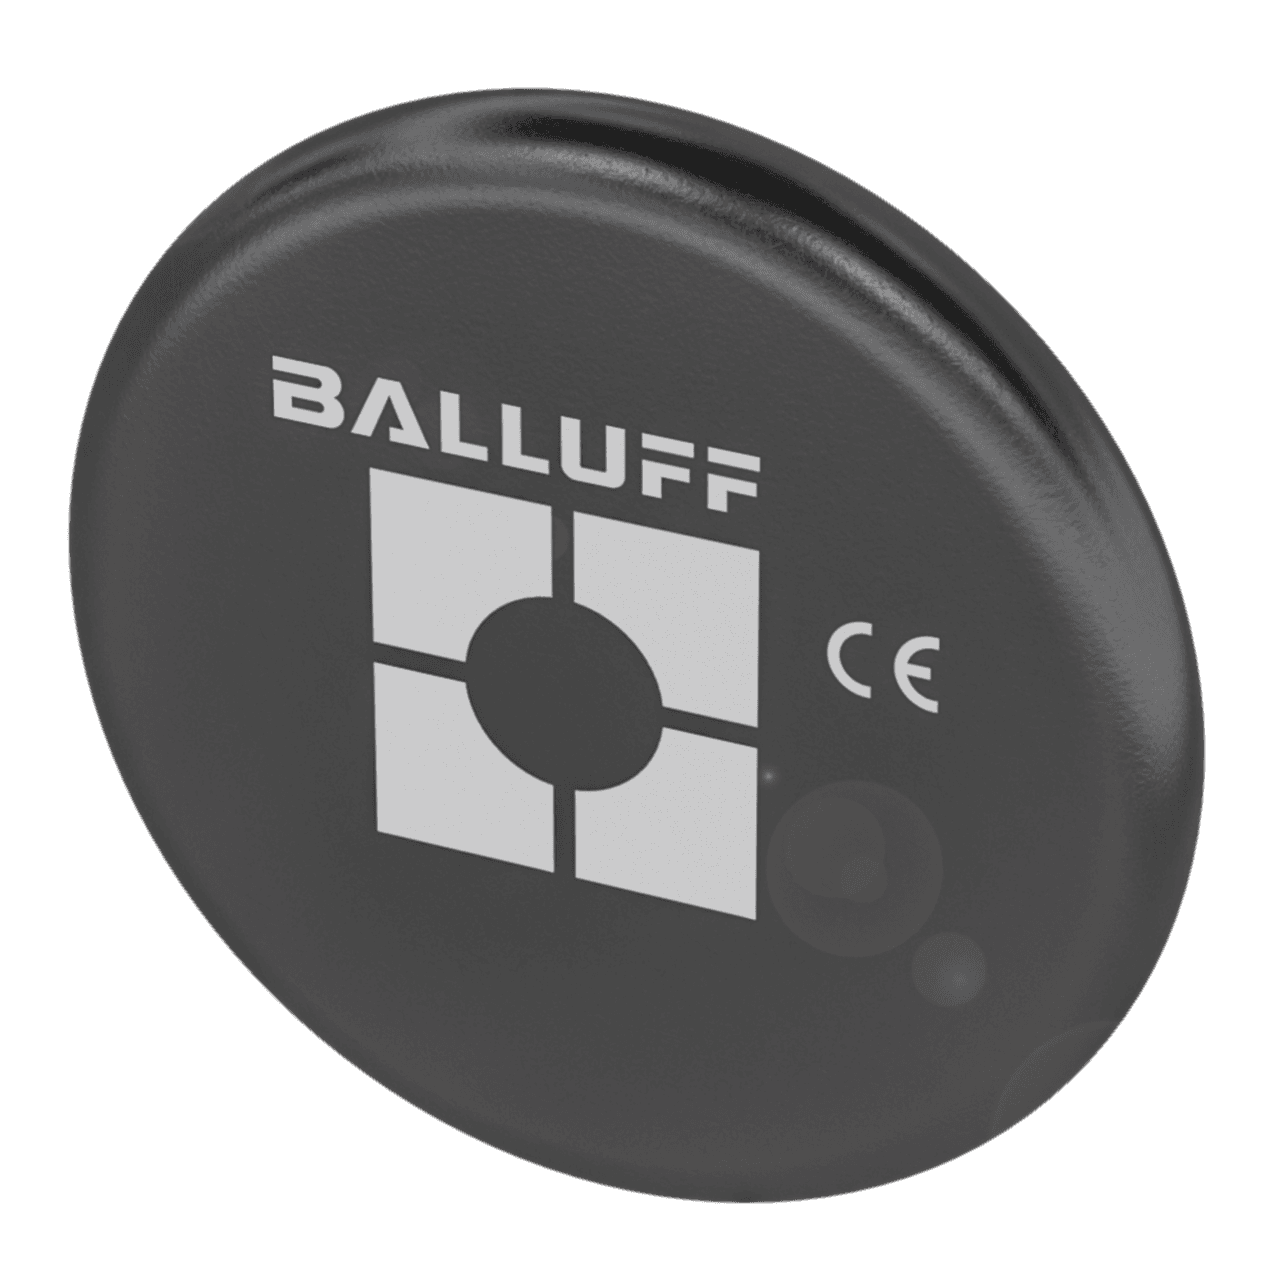 Balluff BIS0044 HF data carriers (13.56 MHz), Product Group: HF (13.56 MHz), Dimension: Ø 20 x 2.8 mm, Antenna type: round, UID serial number, read-only: 8 Byte, Memory type: FRAM, Supported data carrier types: DIN ISO 15693, User data, read/write: 2000 Byte